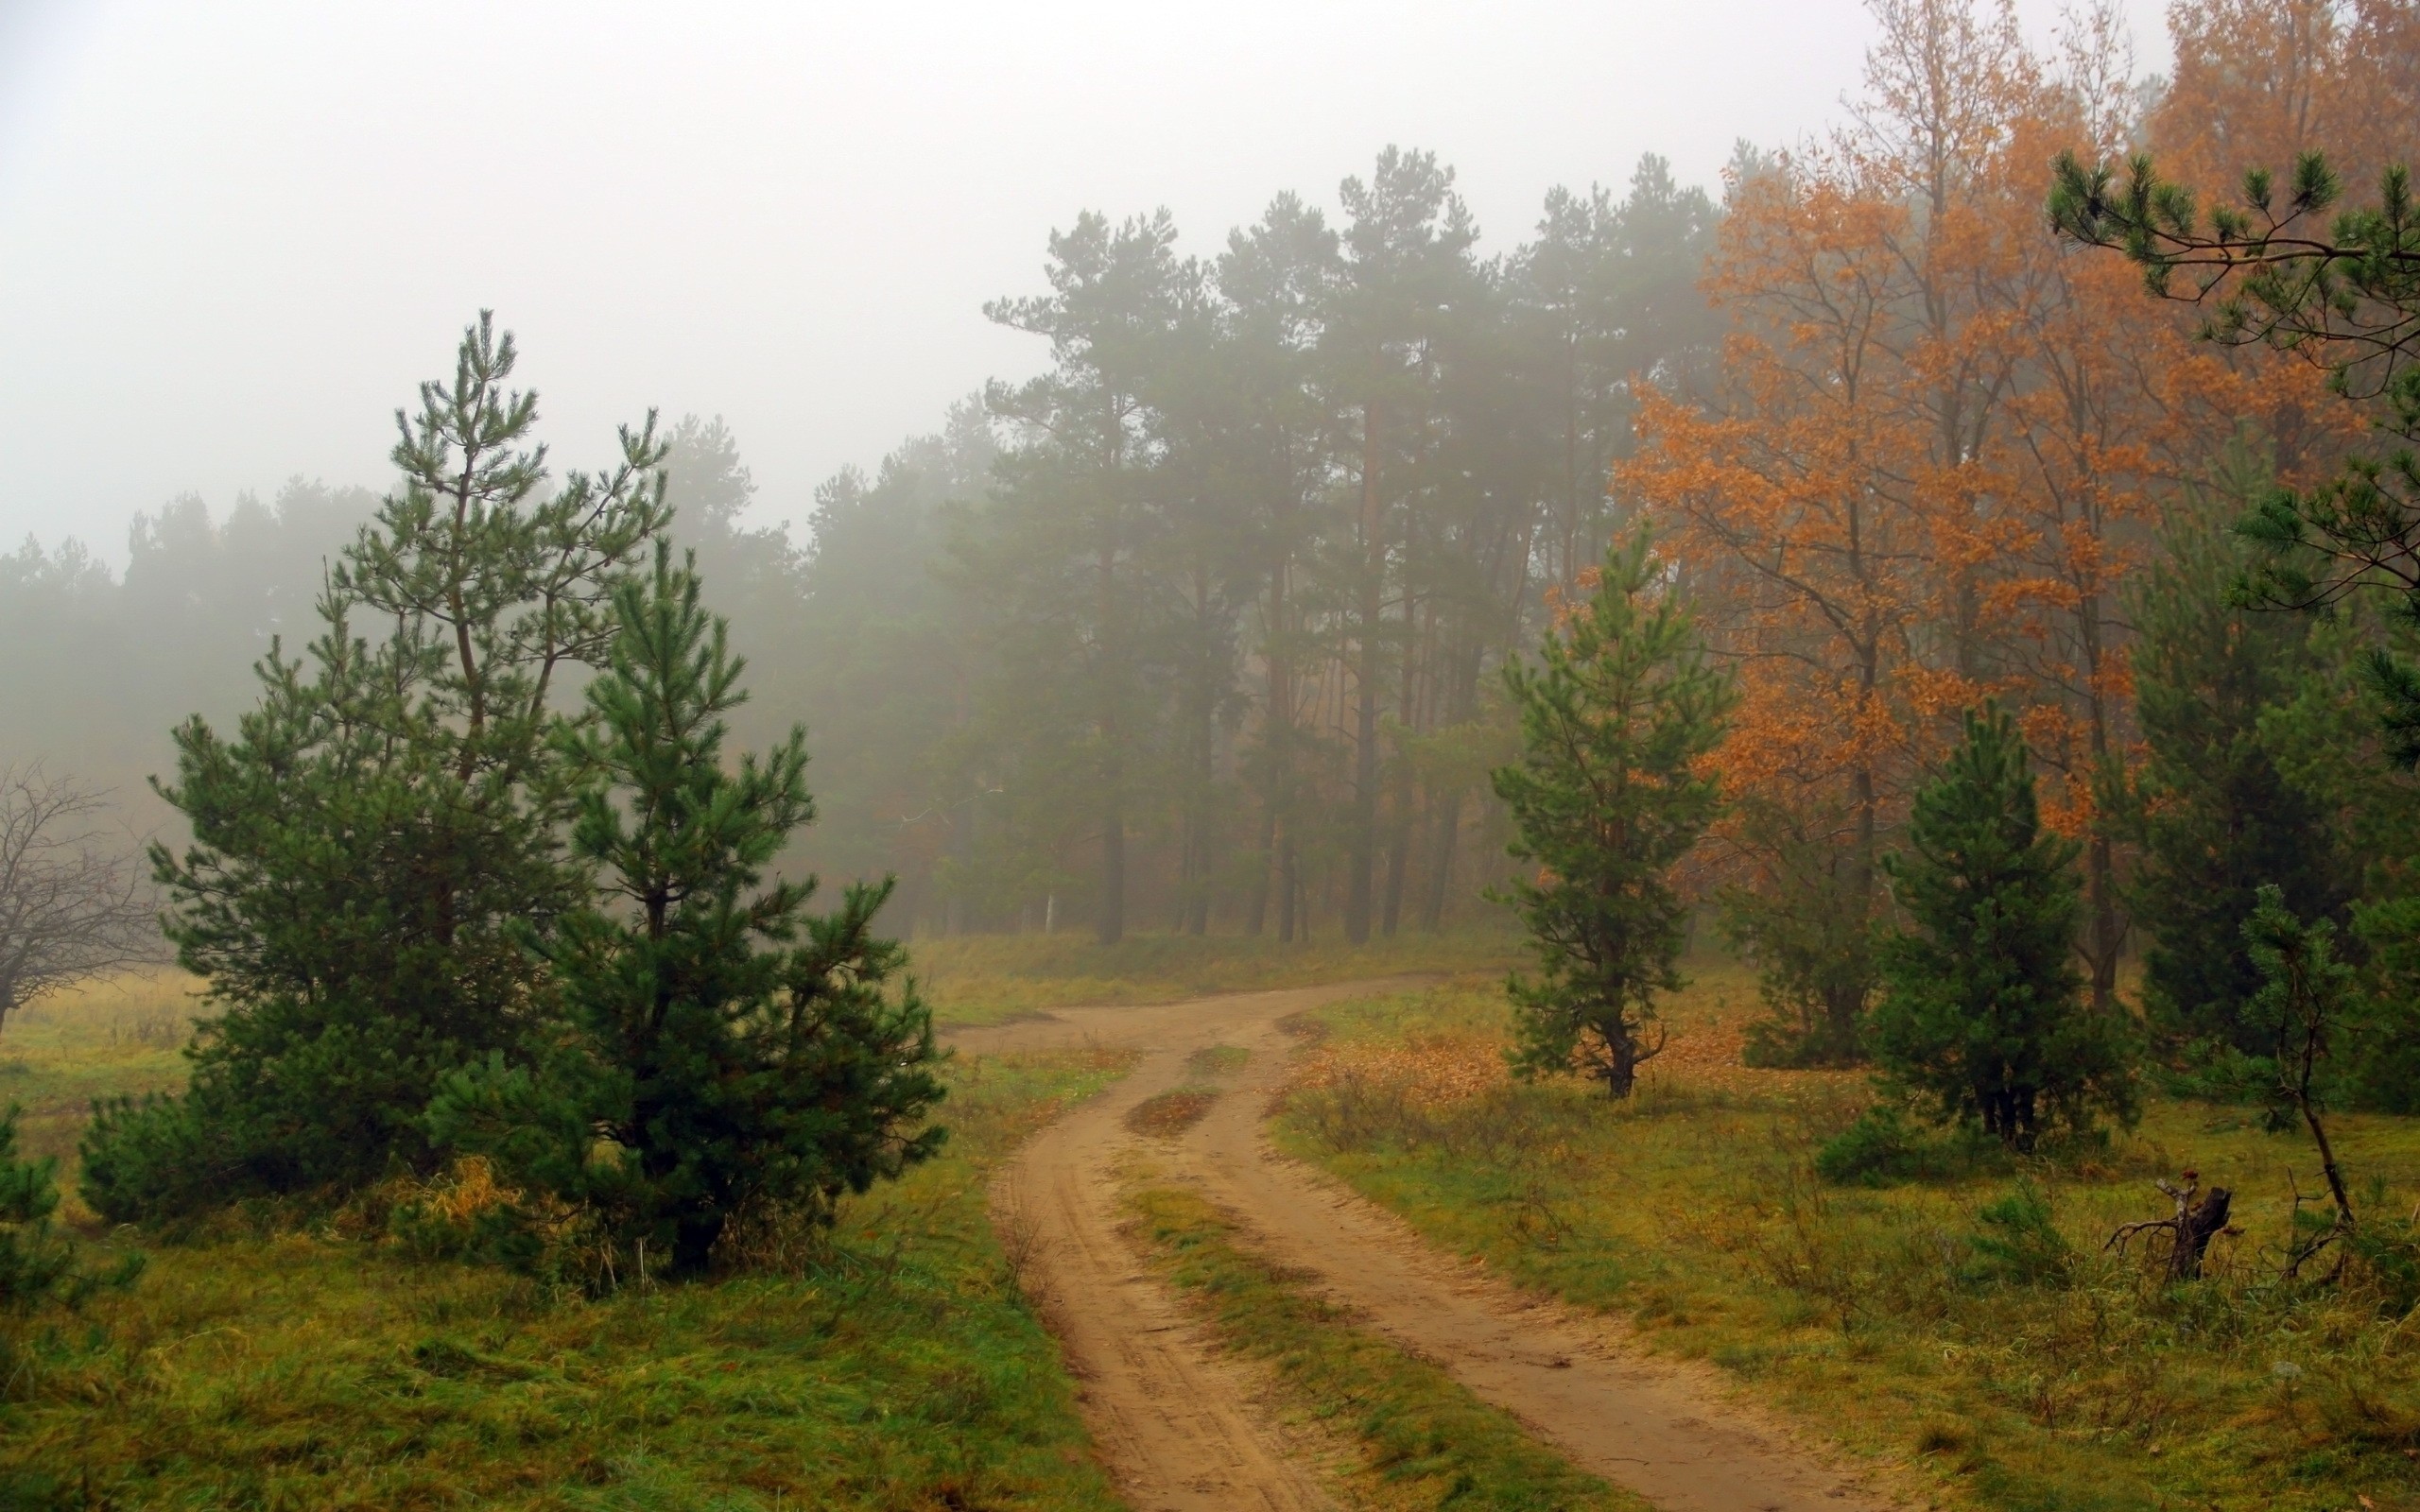 General 2560x1600 nature trees dirt road outdoors